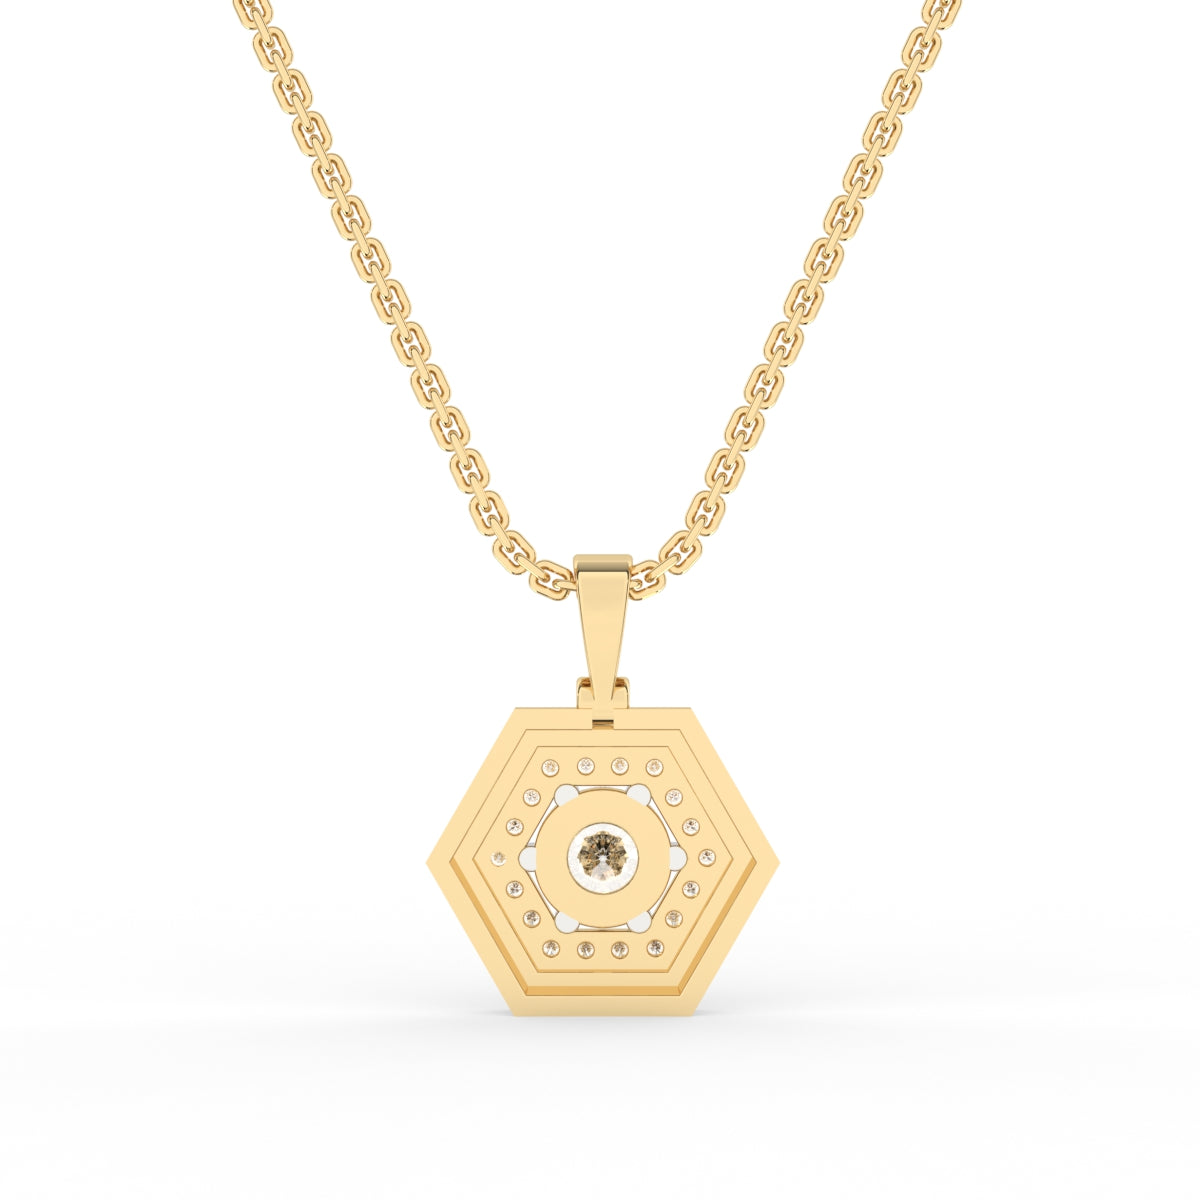 Classic Hexagon Shped Halo Pendant For Her